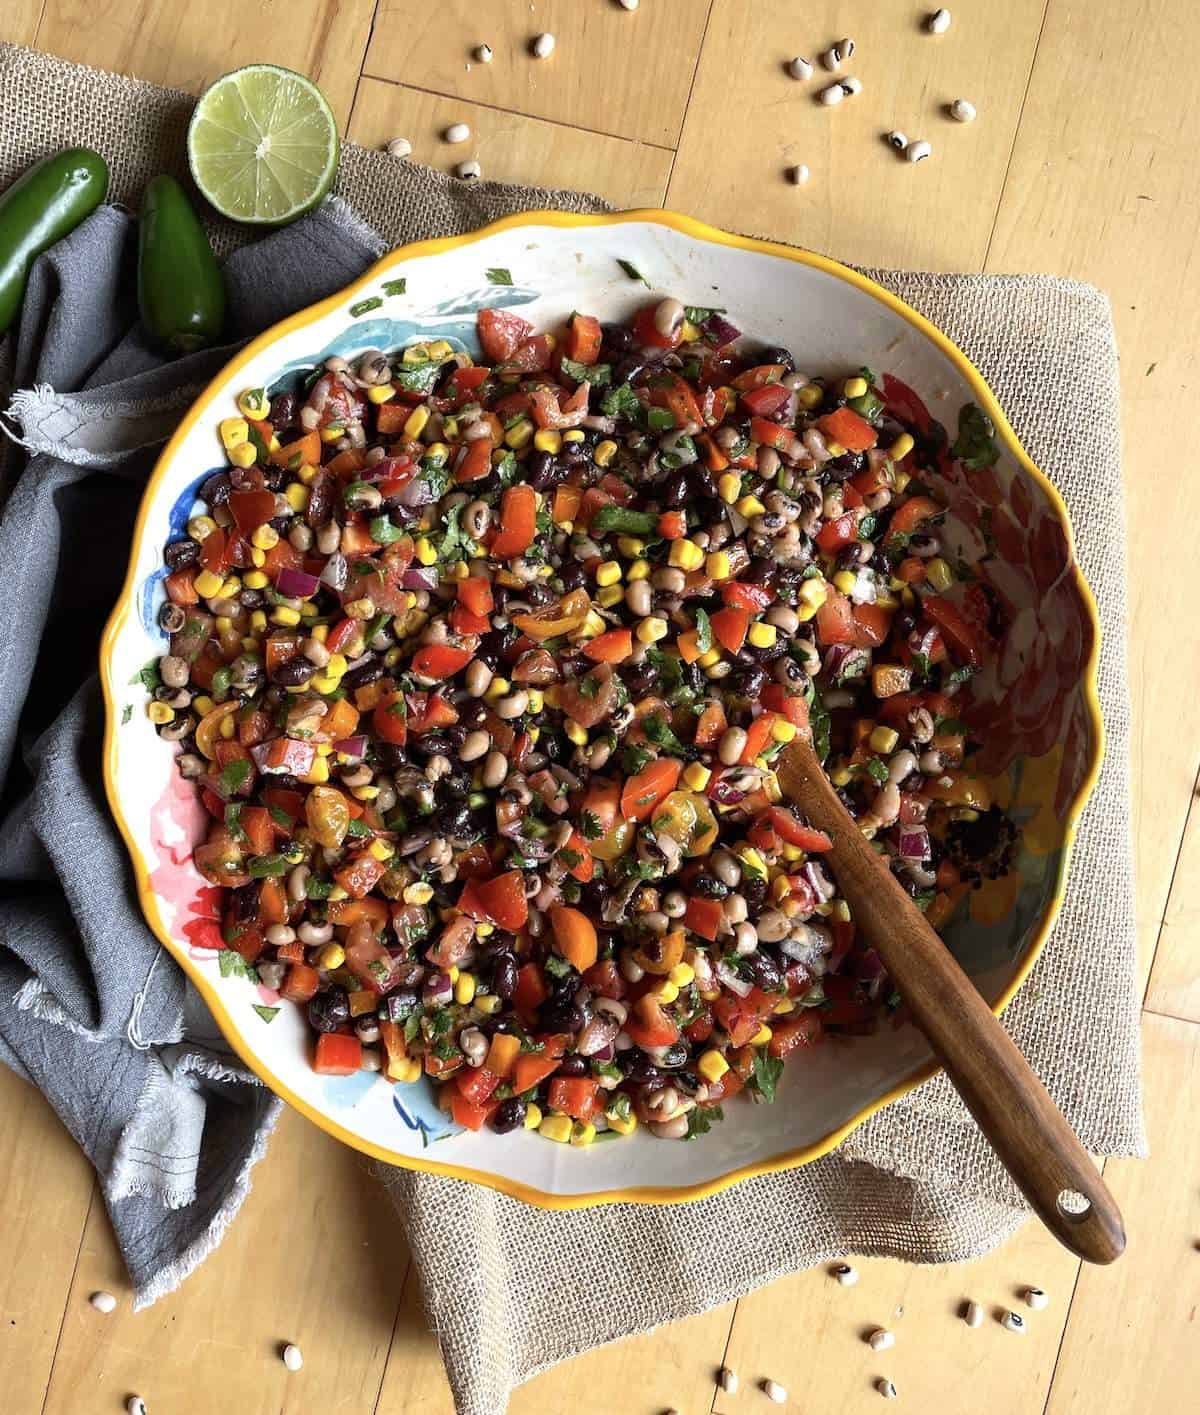 A bowl of redneck caviar with black-eyed peas, black beans, corn, tomatoes, cilantro, peppers, and a vinegar dressing with a wooden spoon.